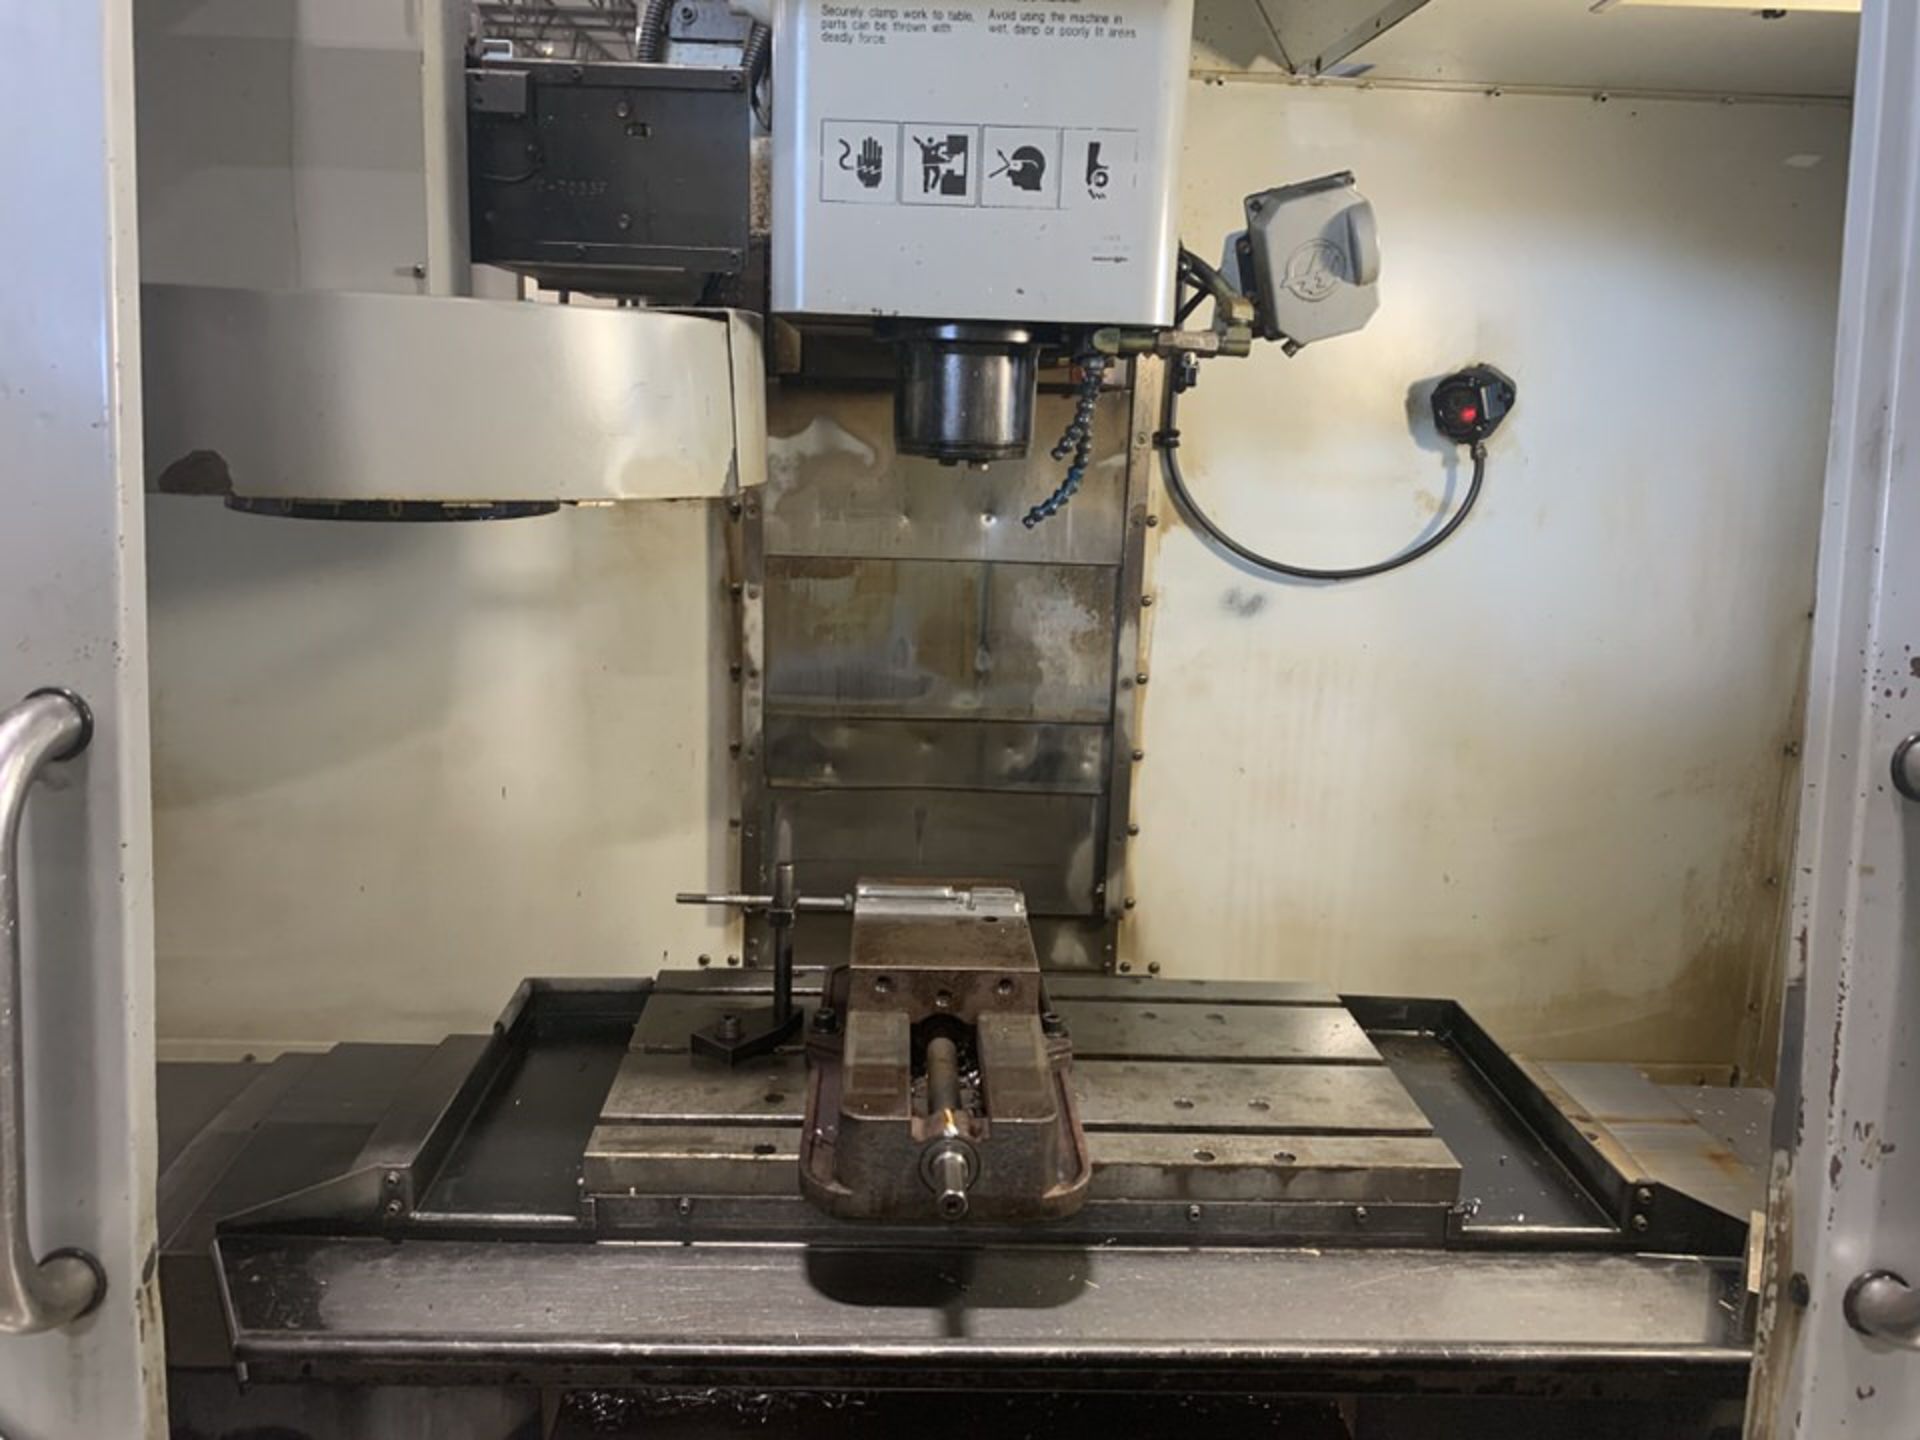 2006 Haas VF-1D CNC Vertical Machining Center - Image 2 of 8